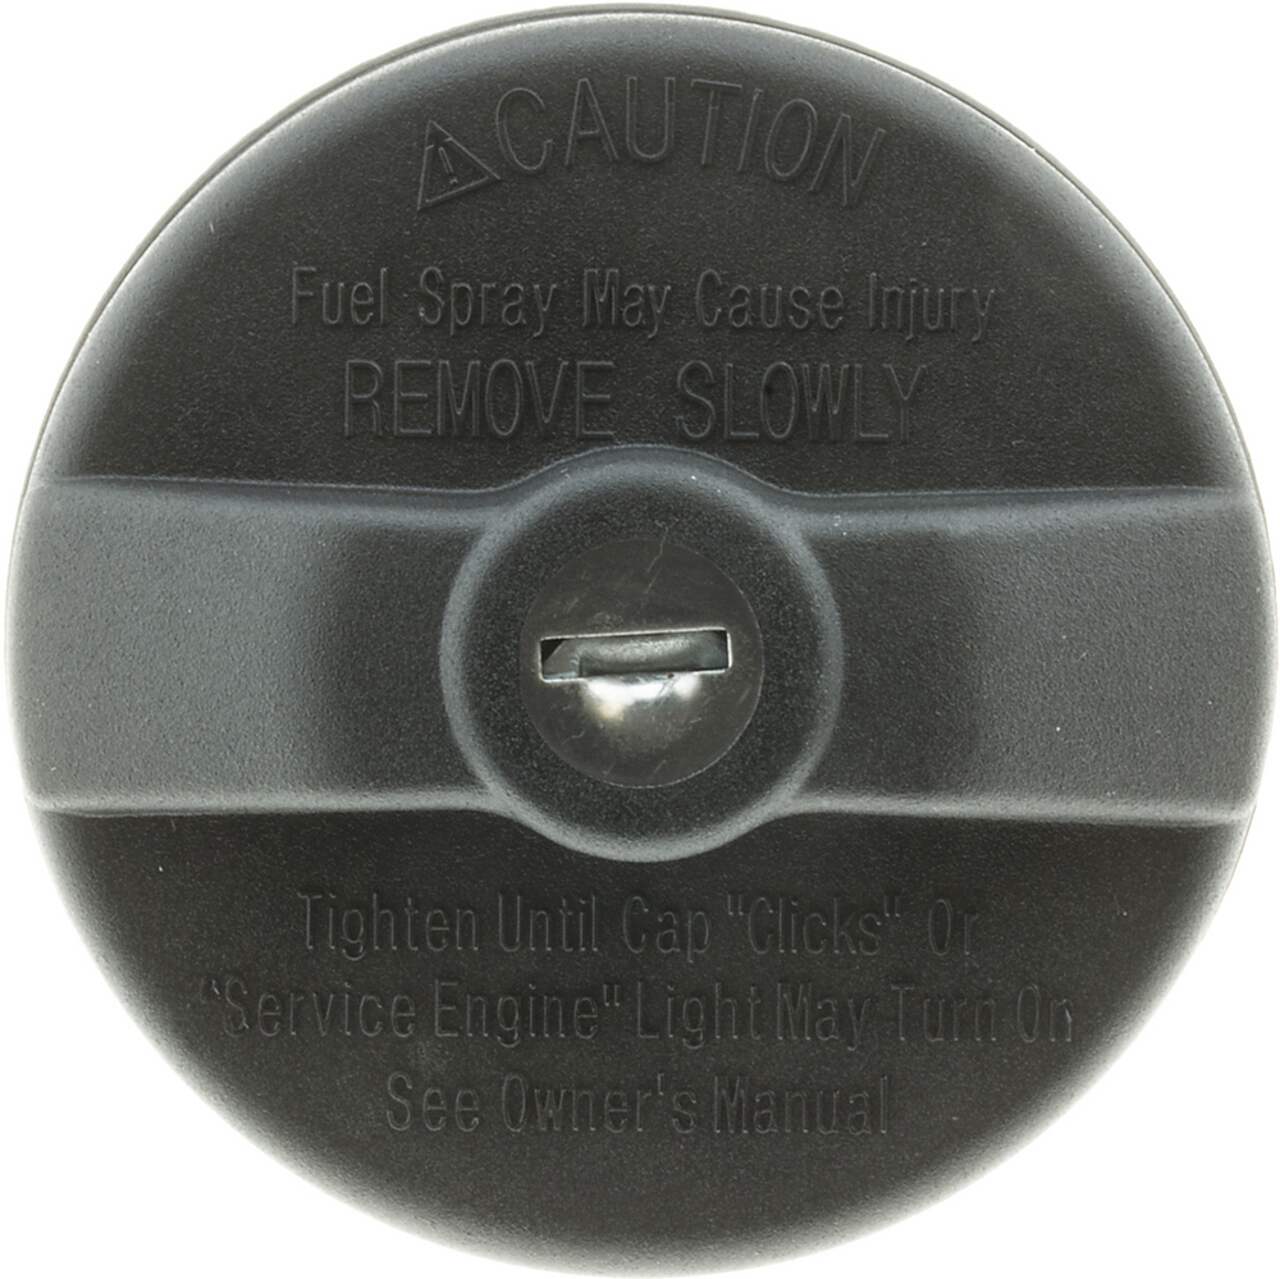 https://media-www.canadiantire.ca/product/automotive/heavy-auto-parts/fuel-engine-repair/0230514/mgc804-lock-gas-cap-7f1a1cdc-1a1e-4c30-b357-6f8203140f2a.png?imdensity=1&imwidth=640&impolicy=mZoom